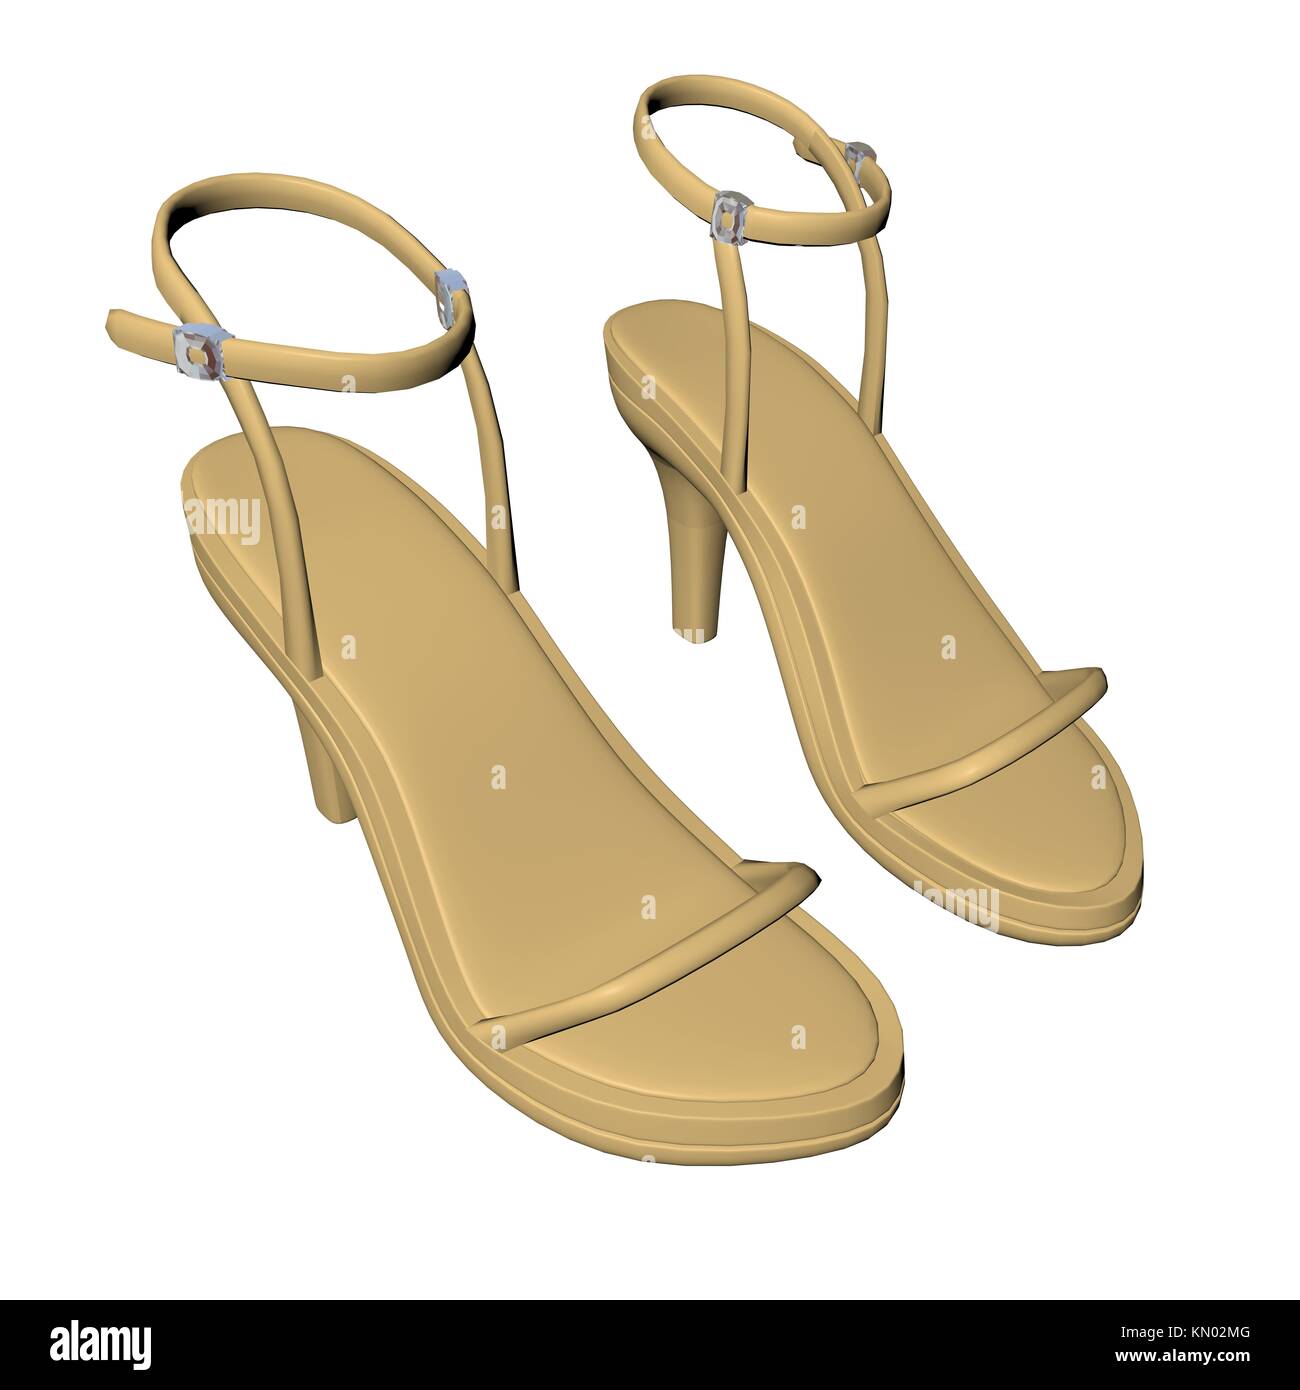 Brown stilleto heels or high heels shoe with ankle strap, 3D illustration, isolated against a white background Stock Photo